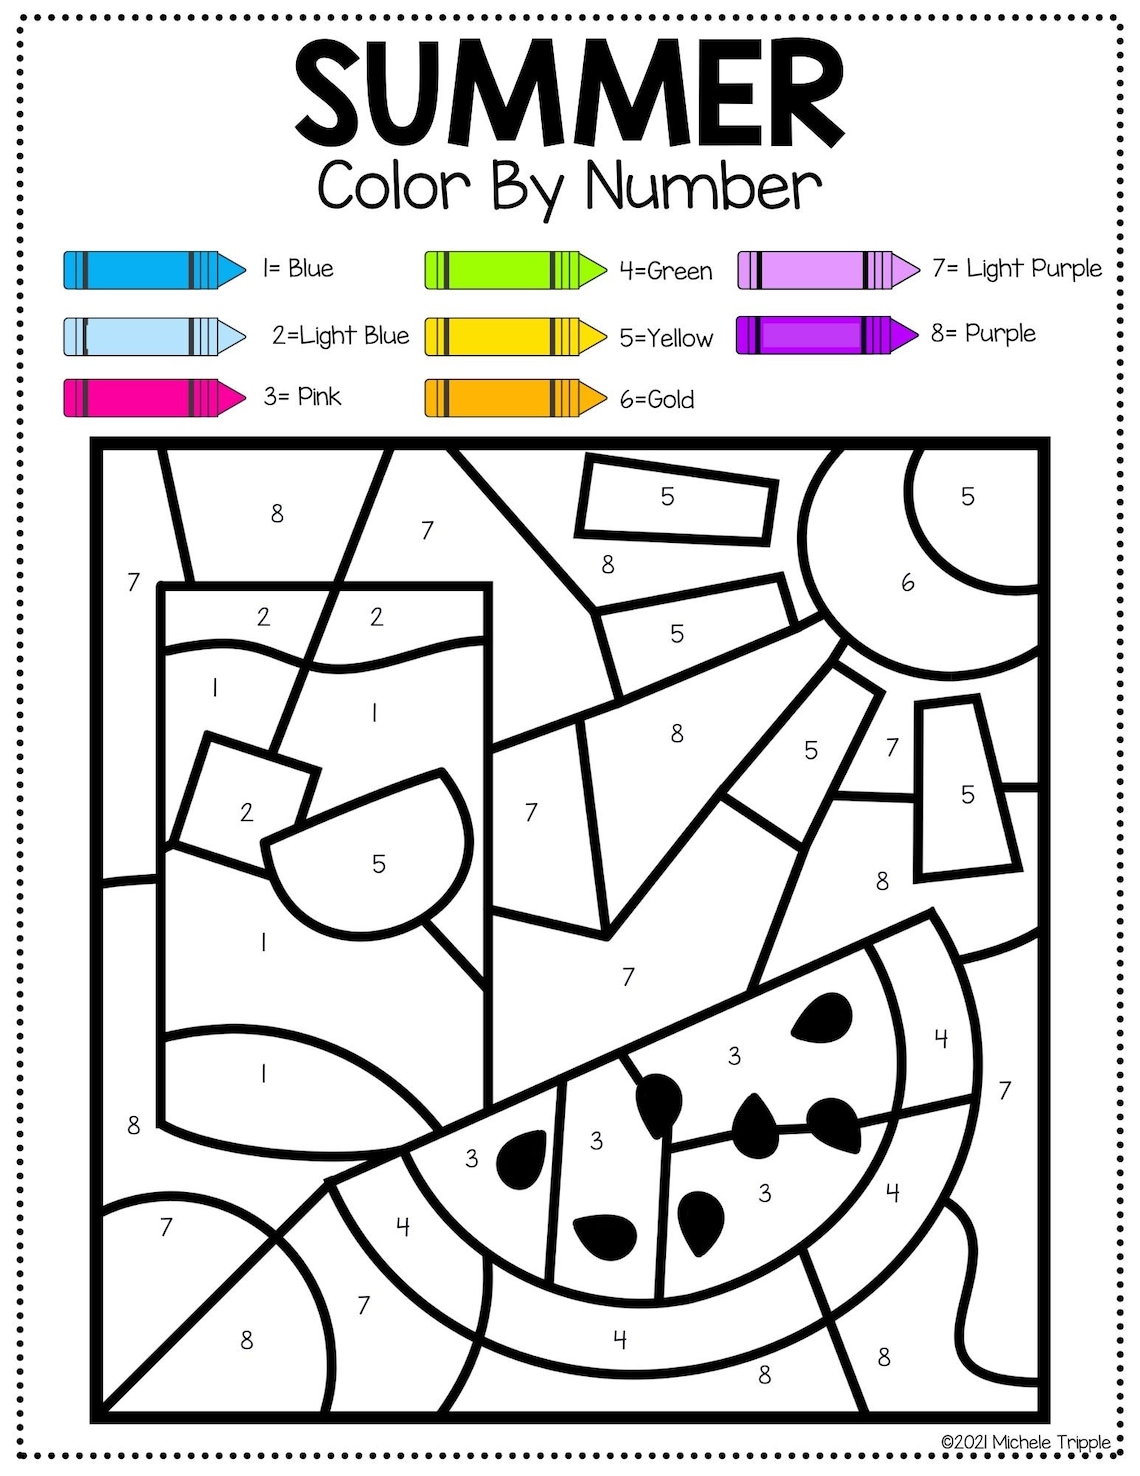 summer-color-by-number-activity-for-kindergarten-back-to-etsy-espa-a